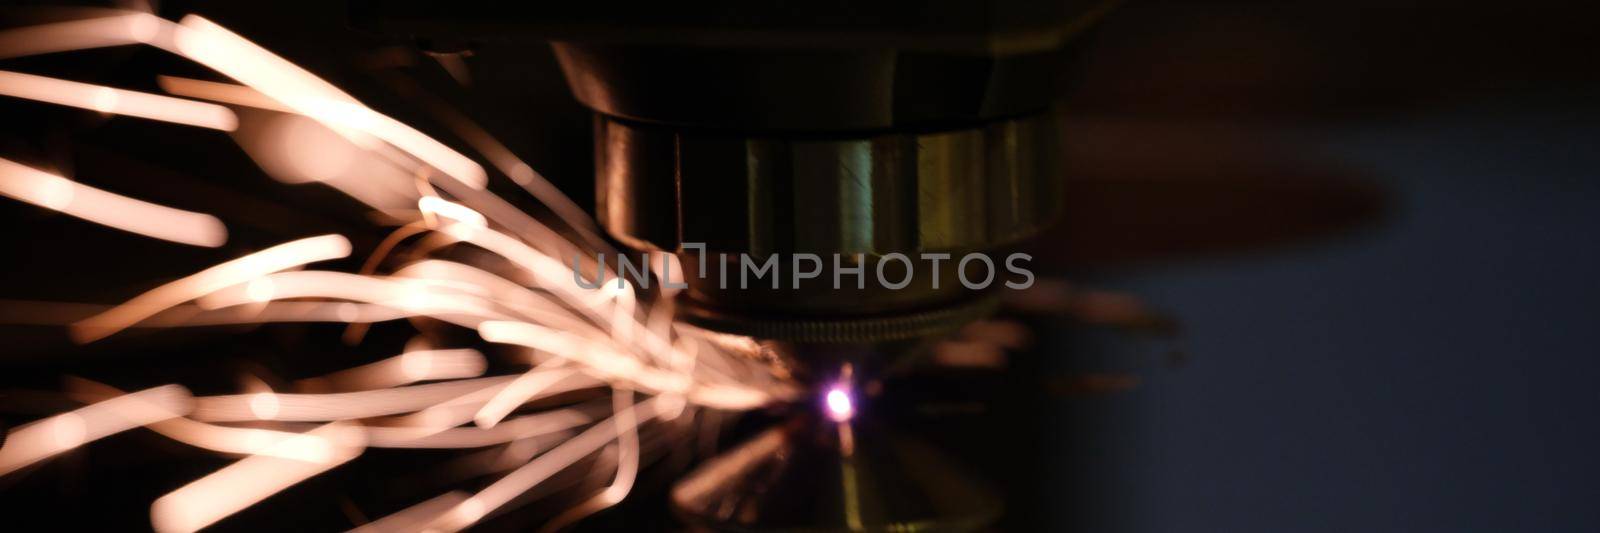 Laser machine cutting metal sheet with sparks blurred background by kuprevich